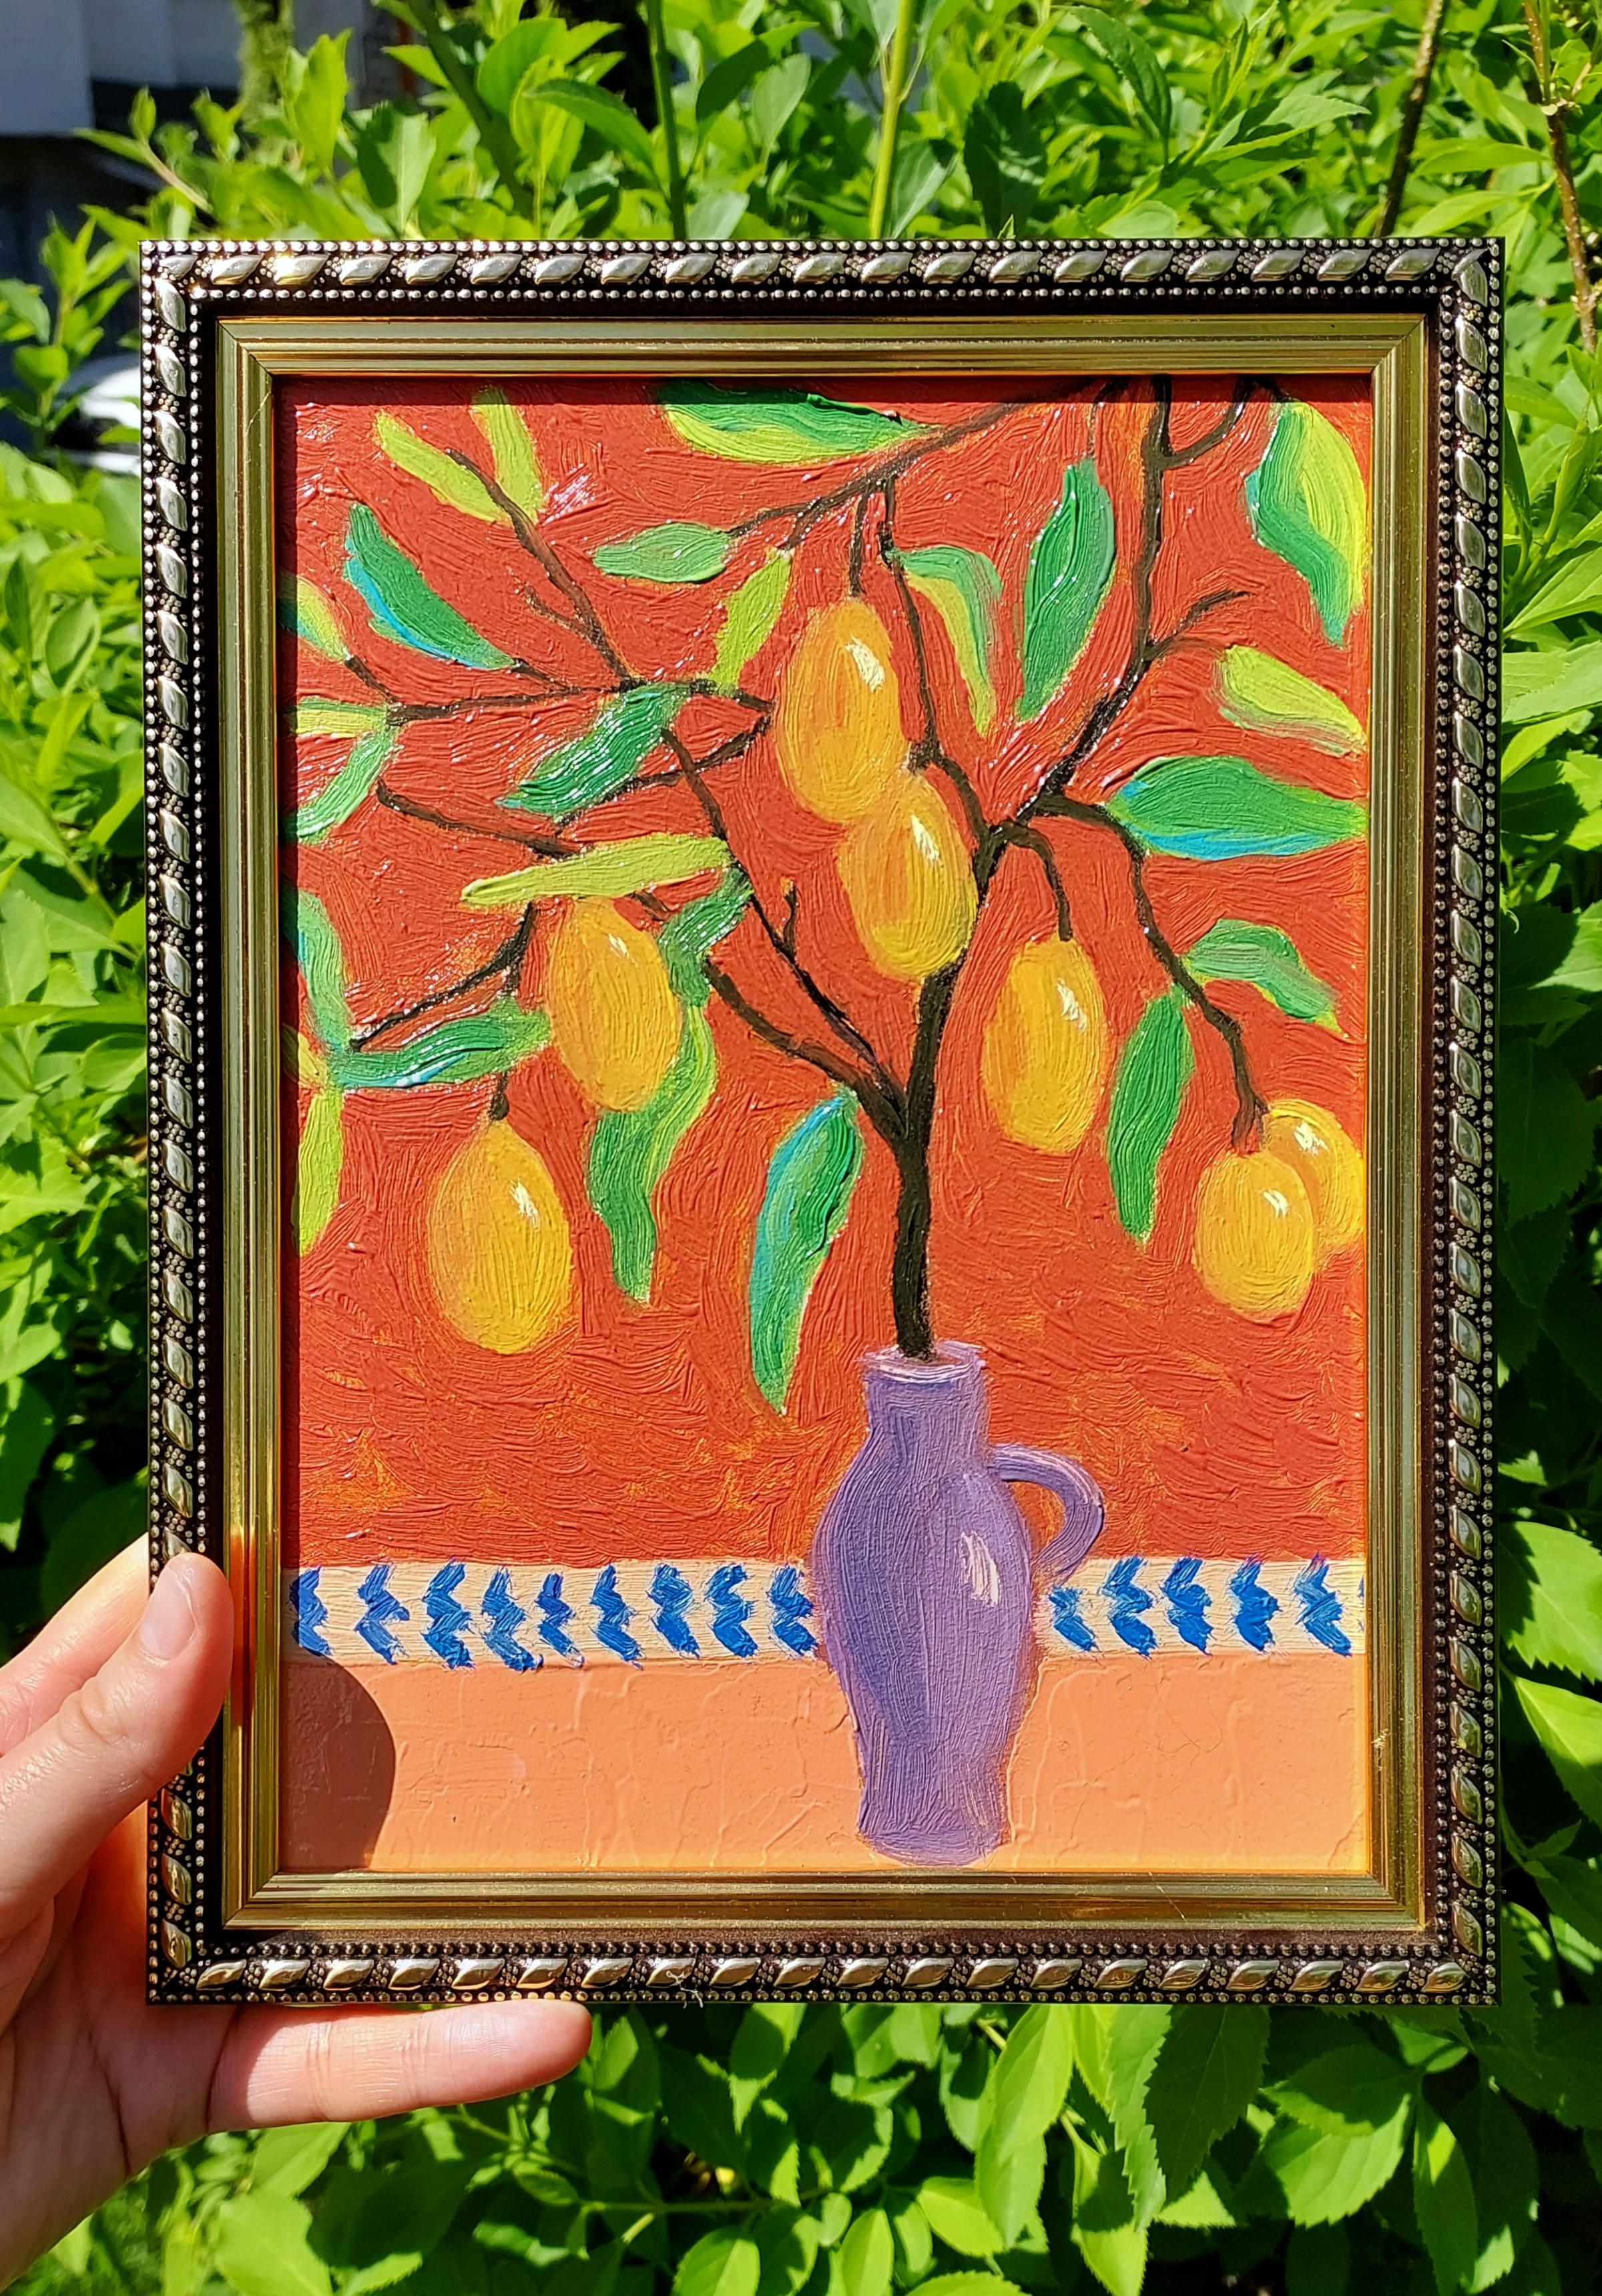 Sweet and Sour Original Oil Painting Lemon Tree by Ksenia Tsyganyuk For Sale 2